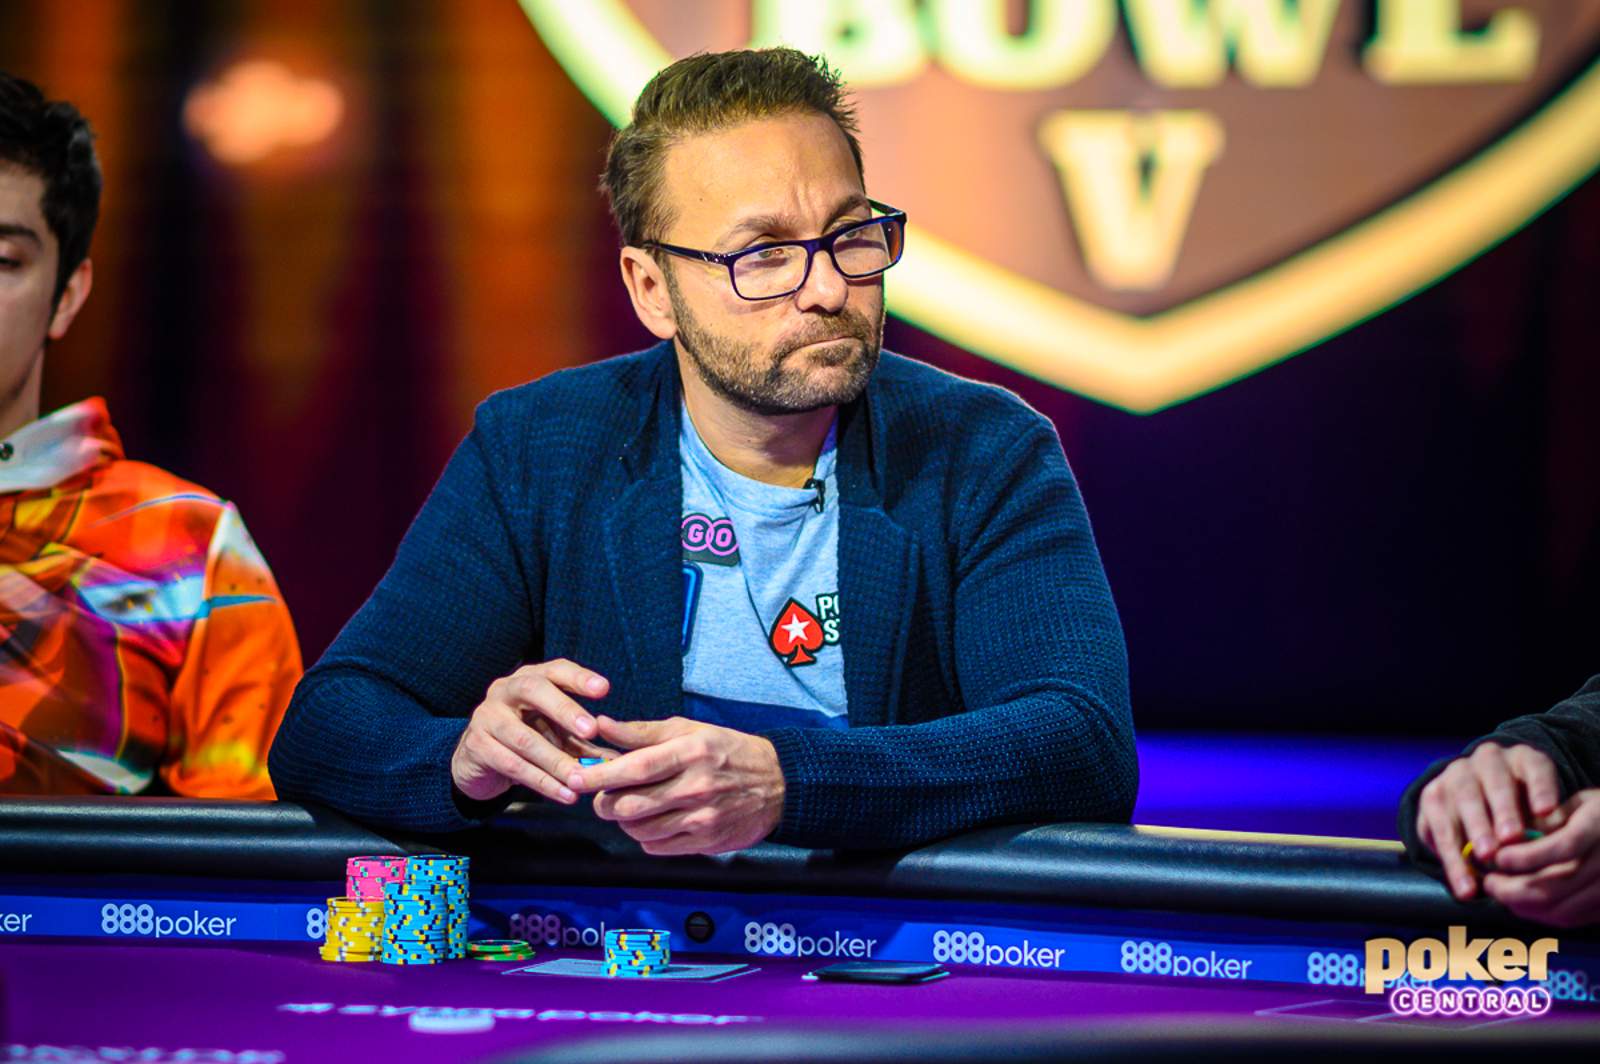 Negreanu Flies High With Old School Approach in Super High Roller Bowl V